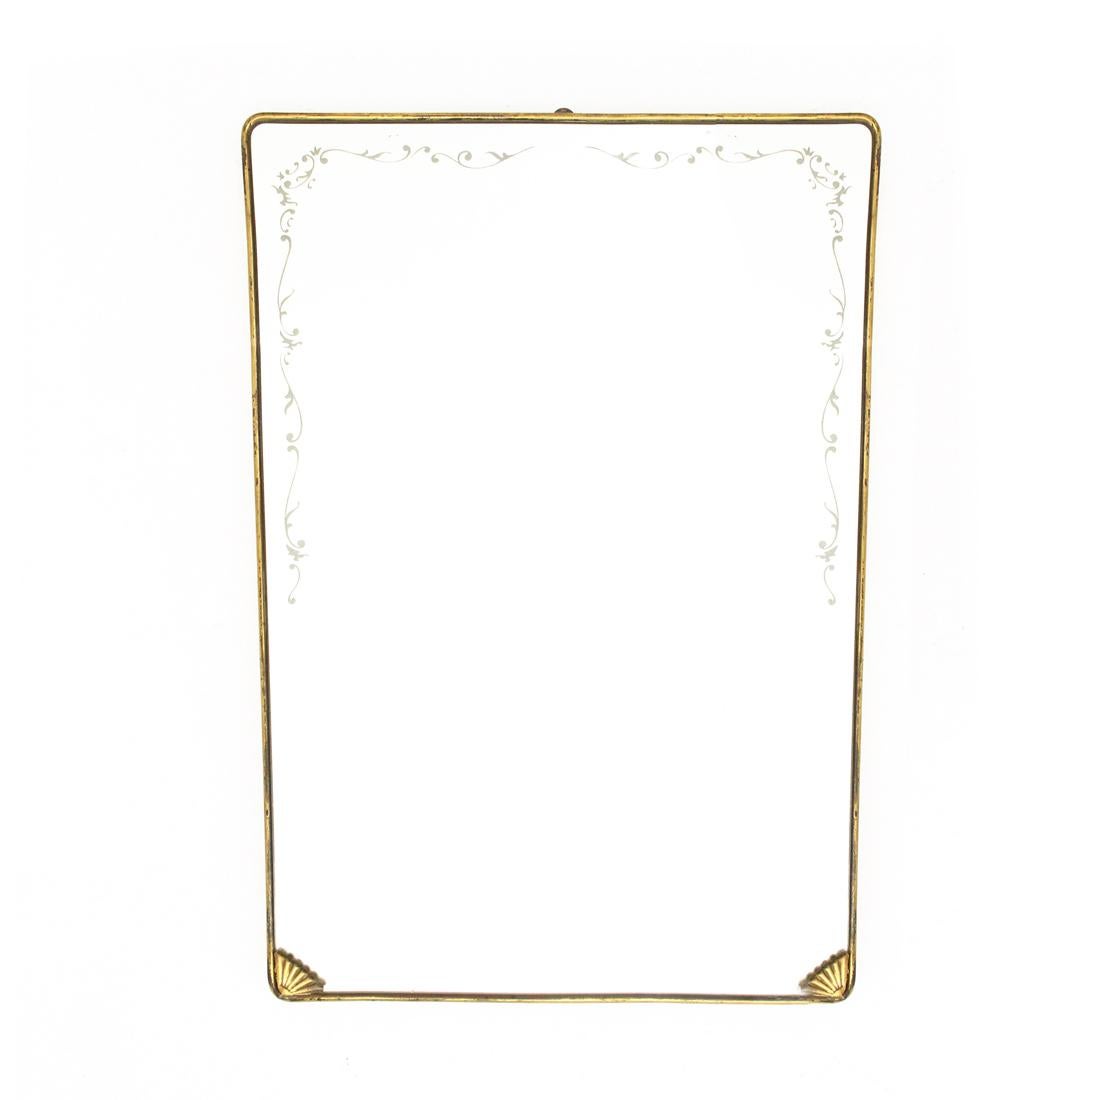 Mid-Century Modern Italian Modern Brass Mirror with Decorations, 1950s For Sale